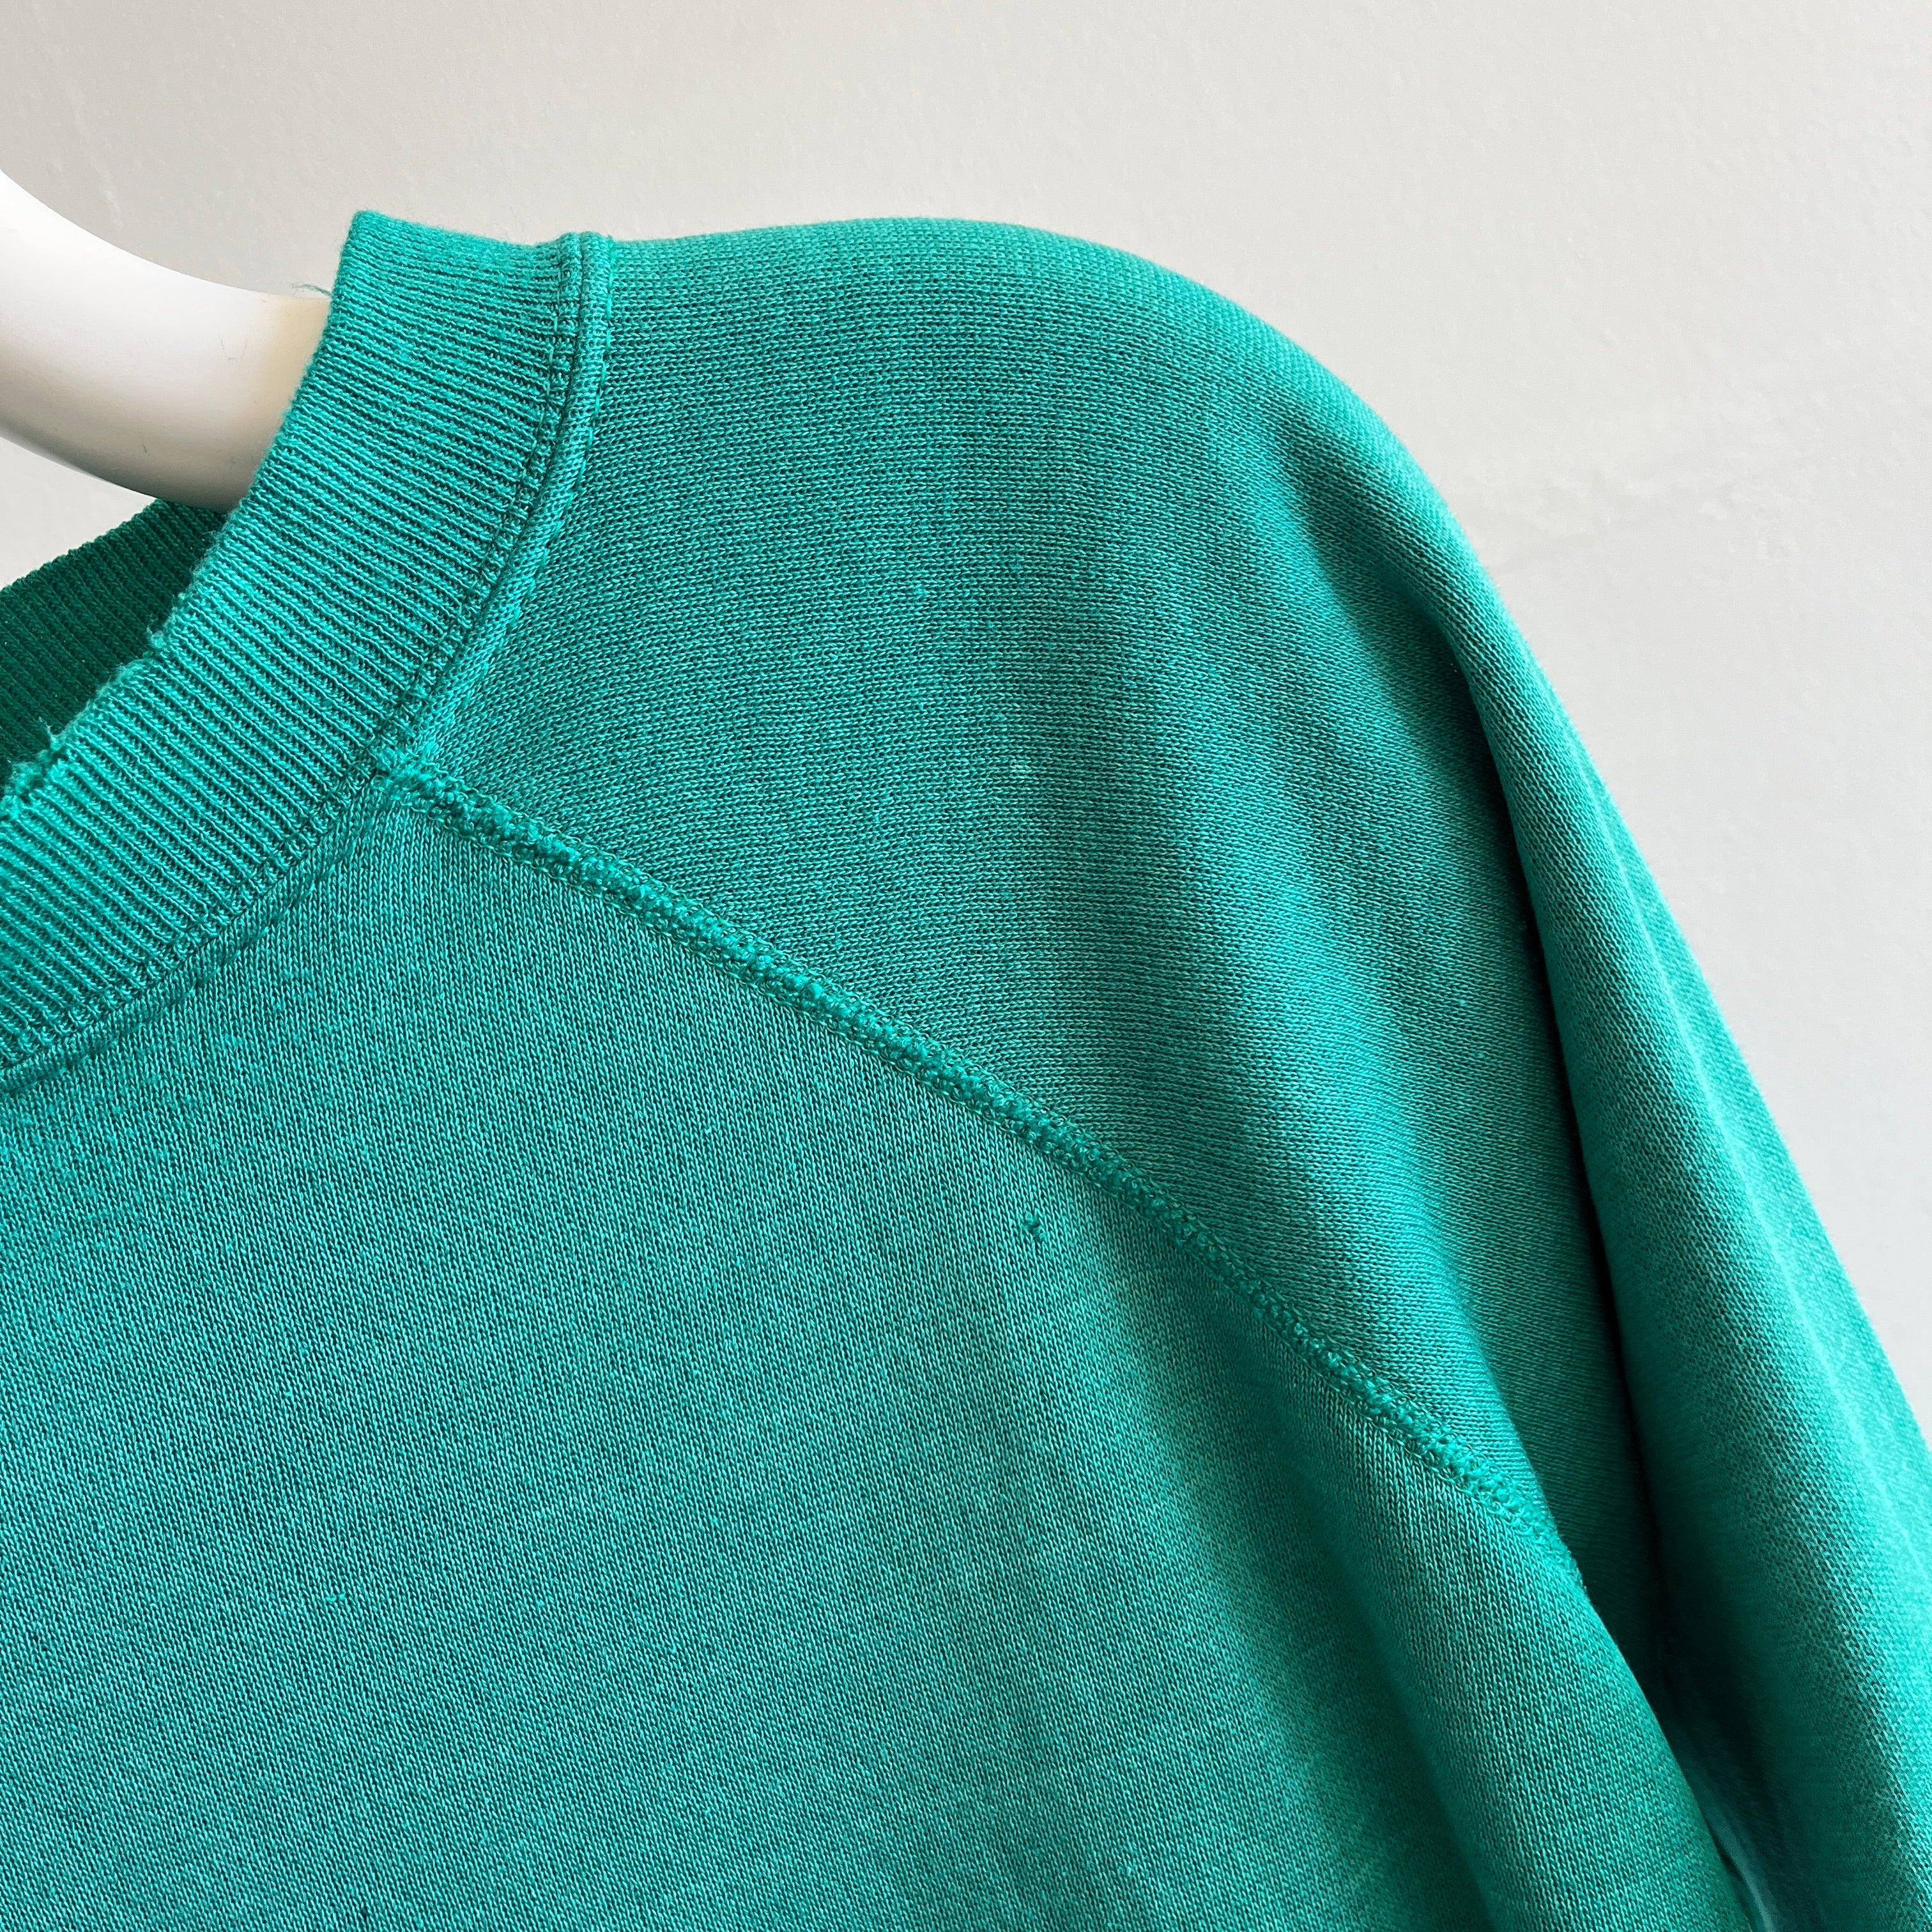 1980s Super Faded, Thin, Pin Striped, Paint Stained Teal Raglan